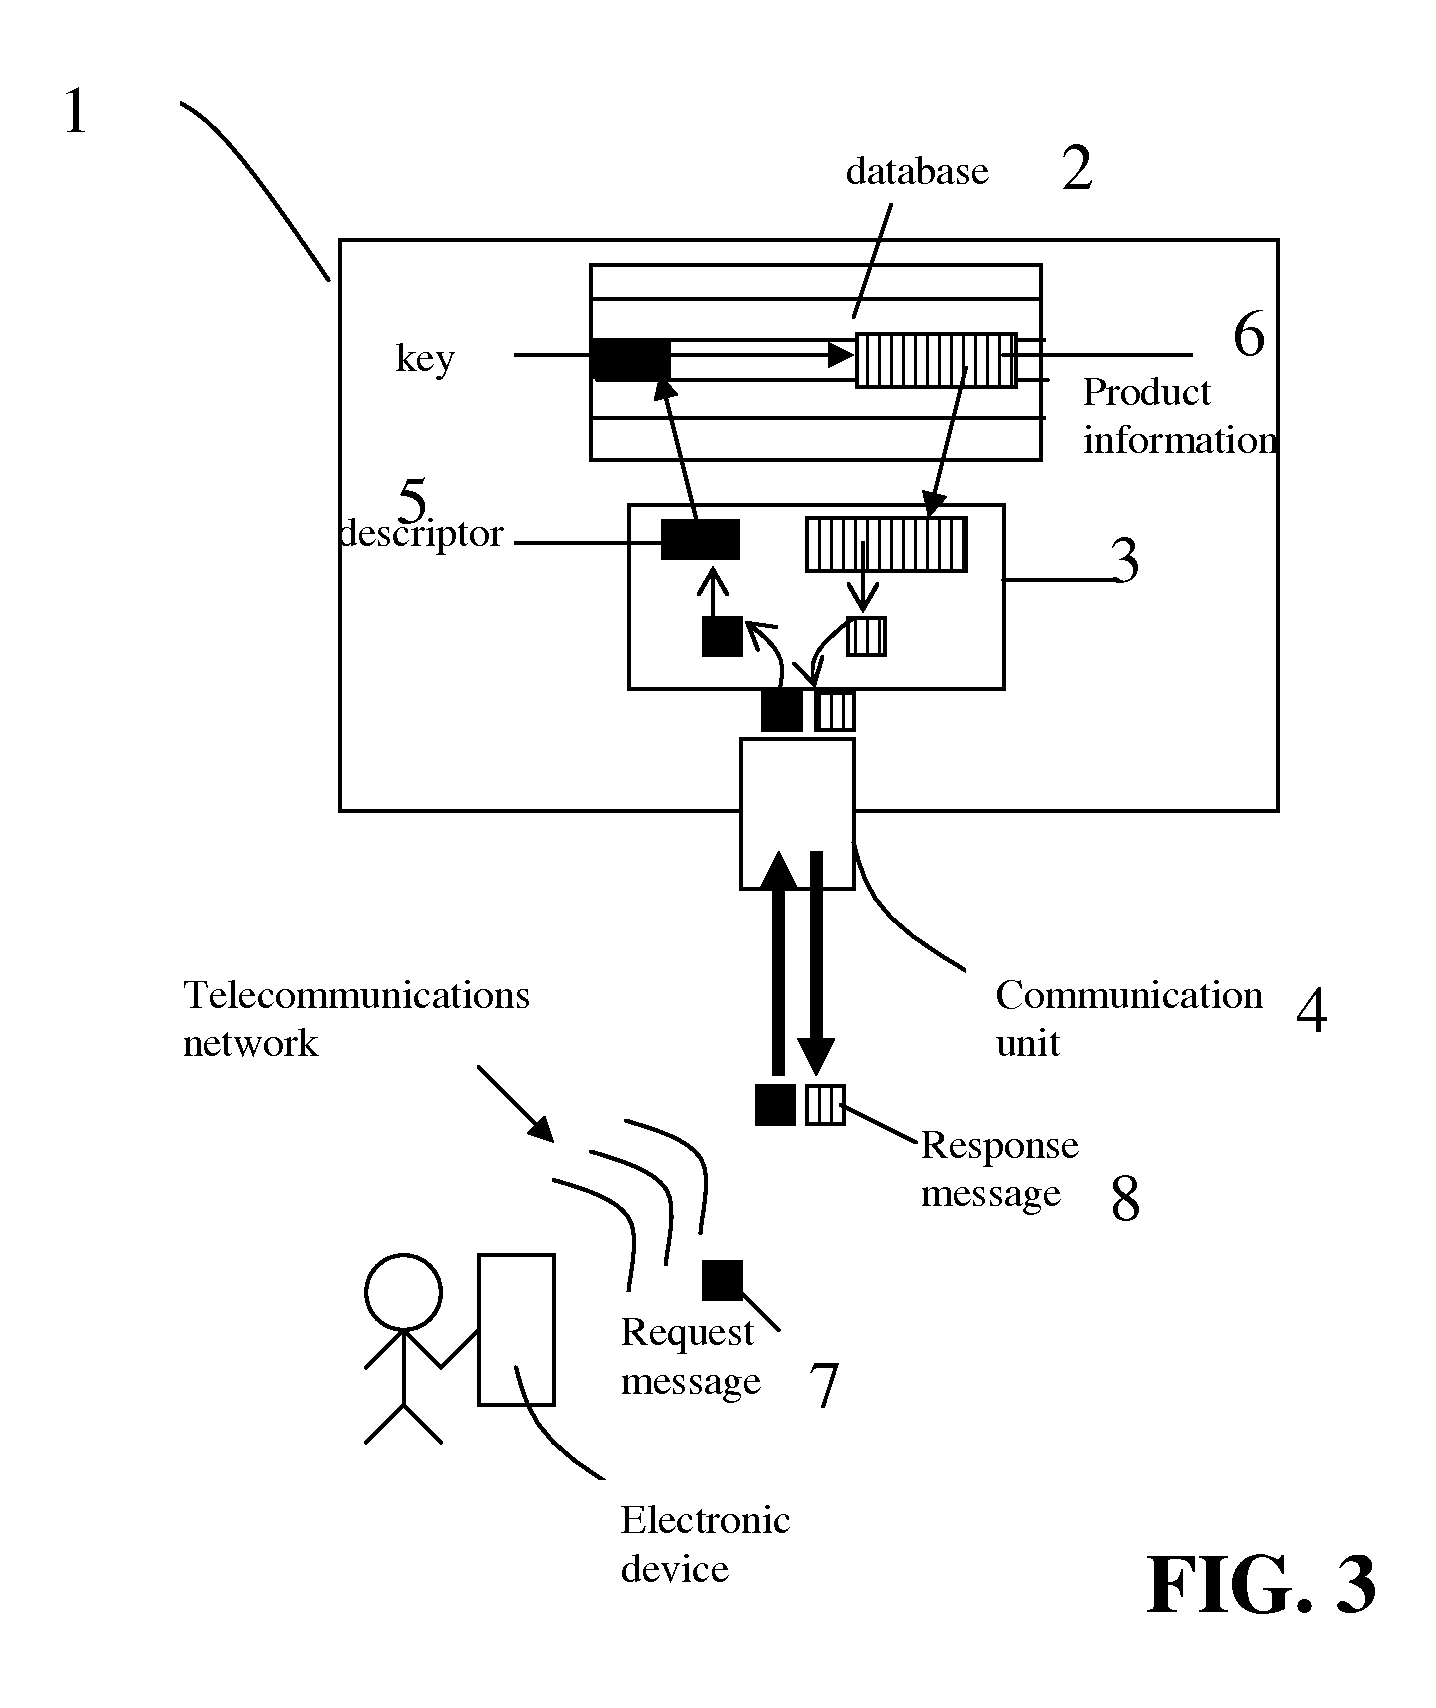 Methods and systems for providing information associated with a consumer good